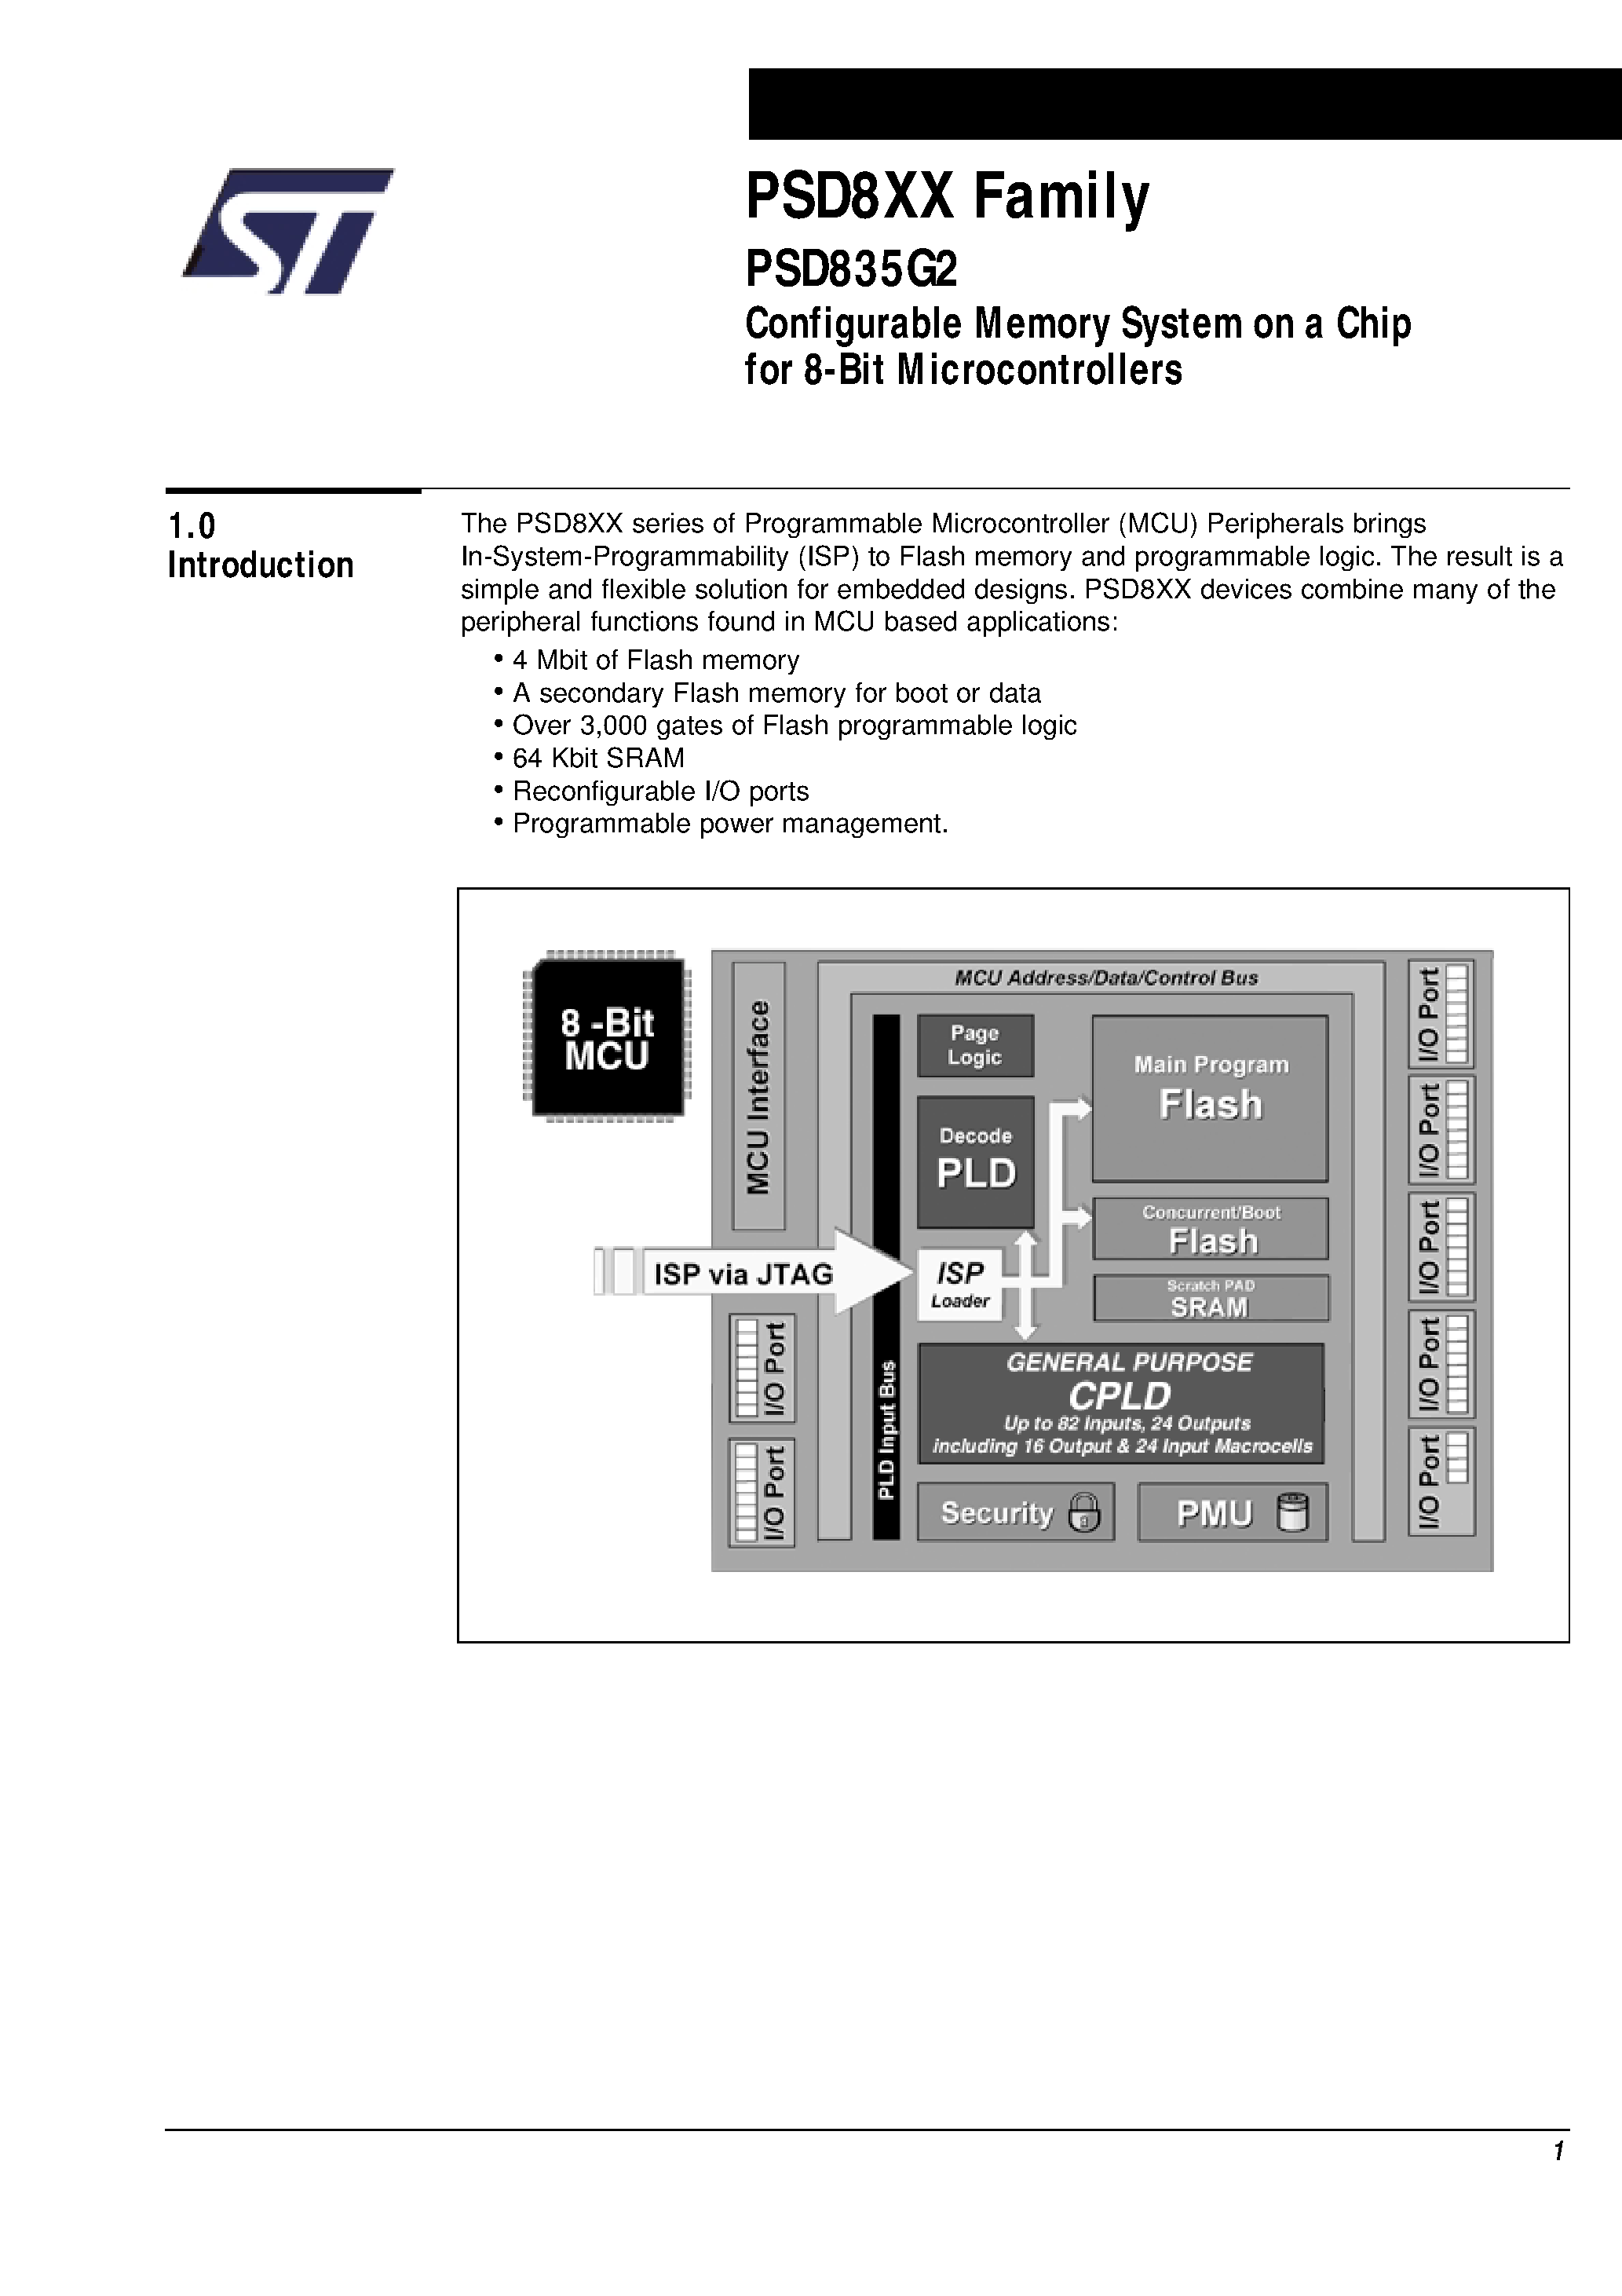 Datasheet PSD835F2-A-15J - Configurable Memory System on a Chip for 8-Bit Microcontrollers page 2